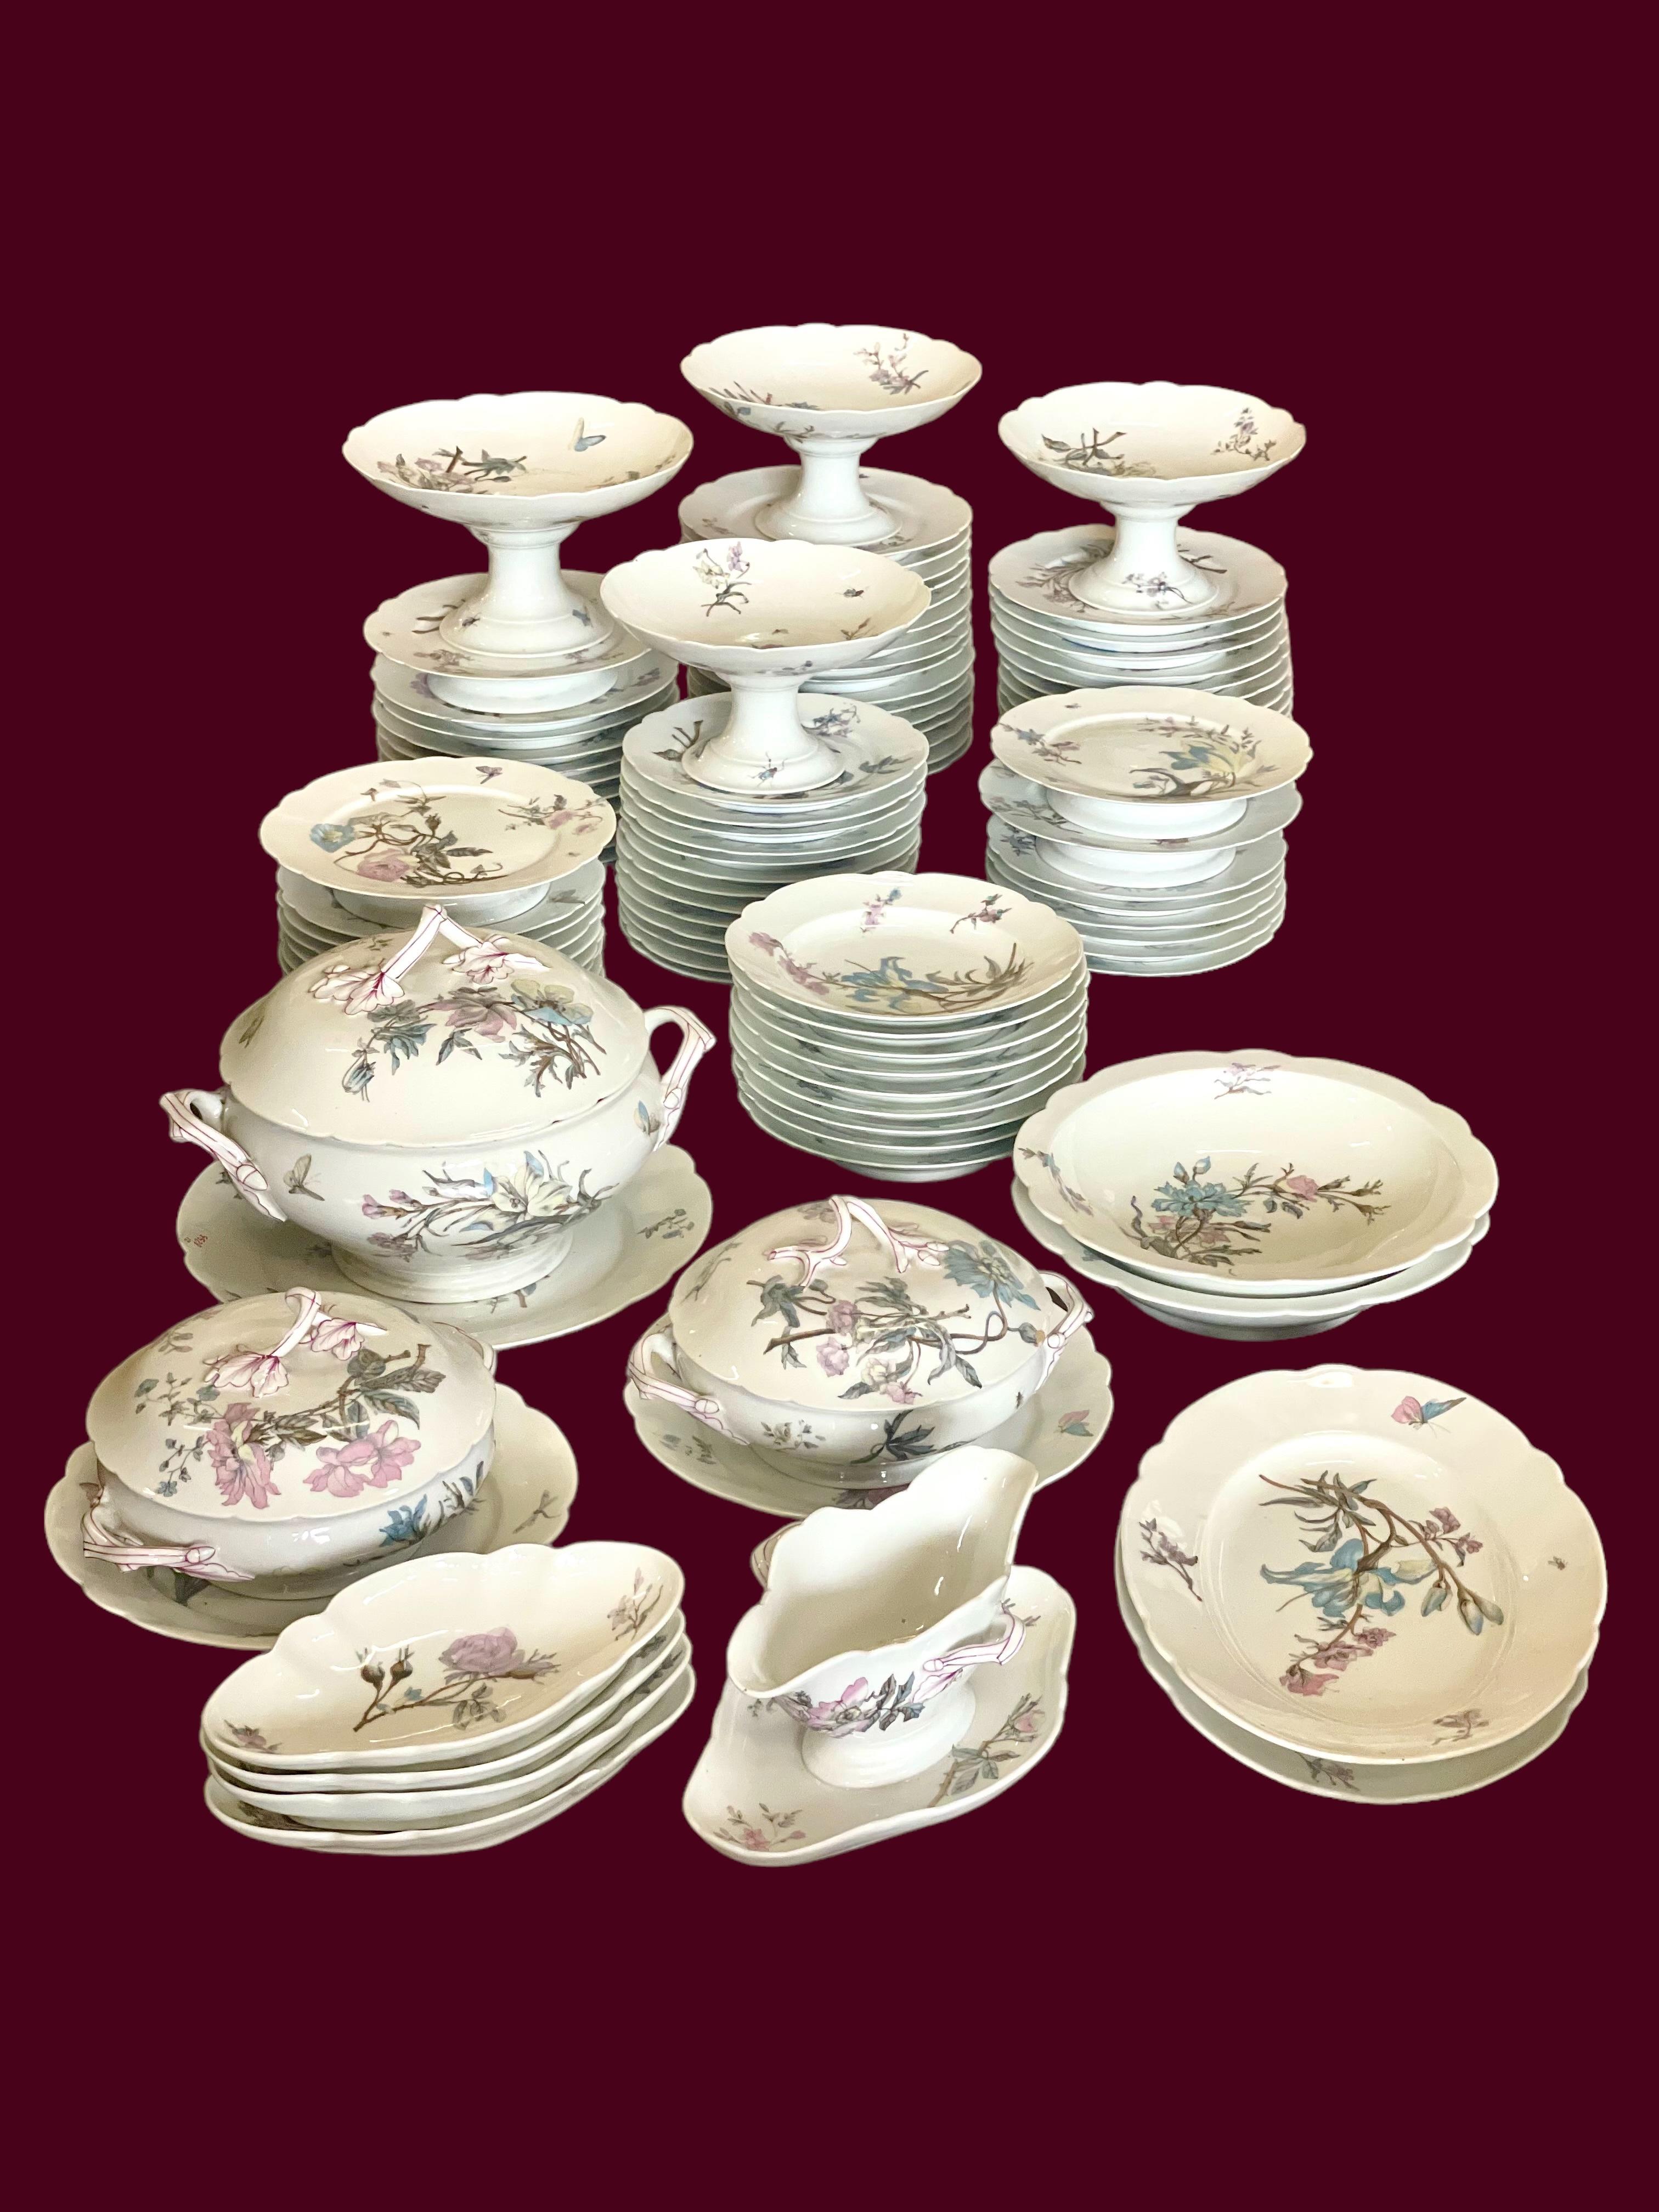 102-Piece Porcelain Dinner Service with Flowers and Butterflies 11